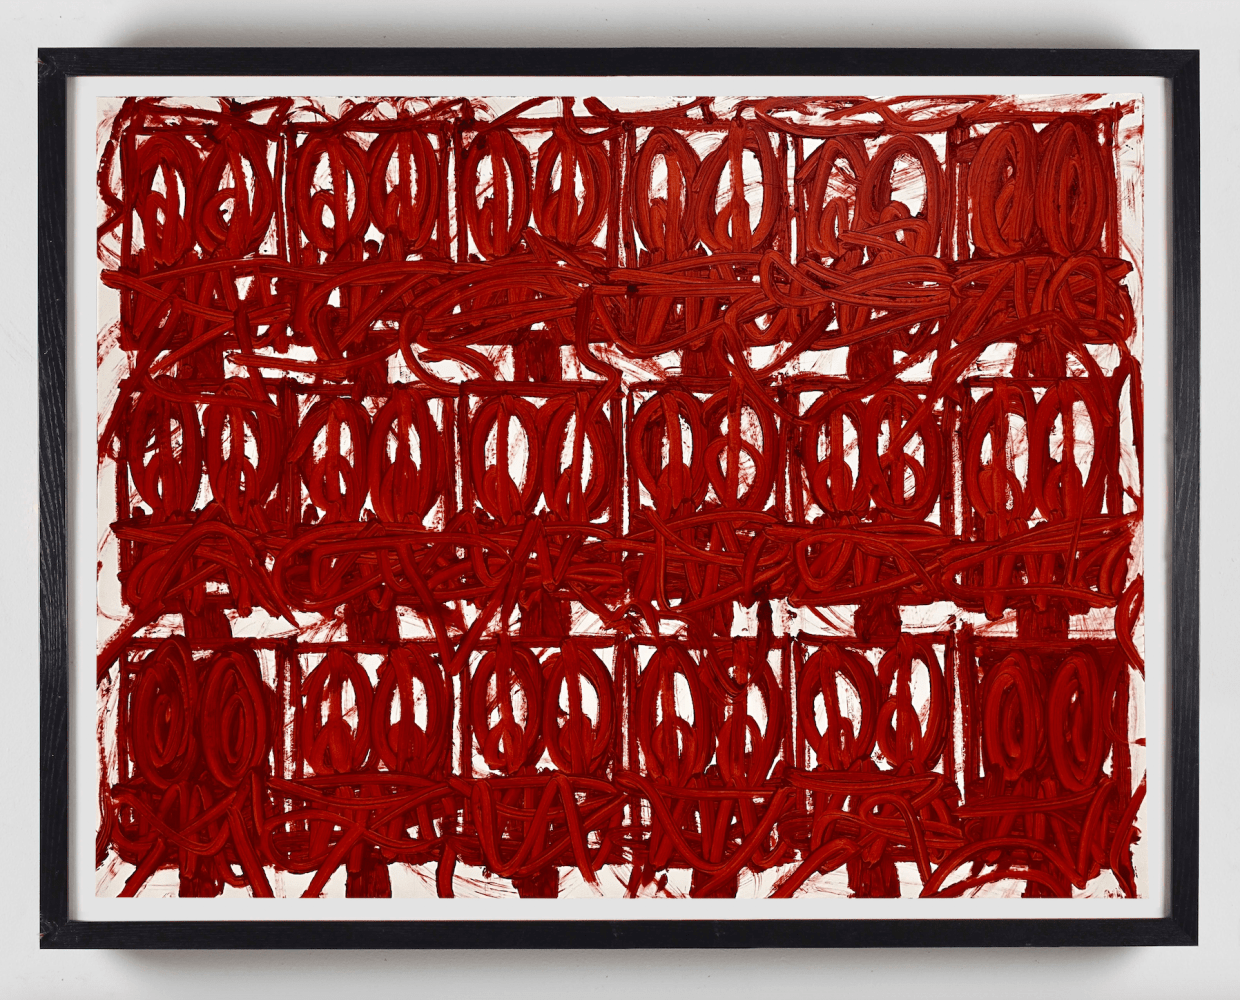 Rashid Johnson
Untitled Anxious Red Drawing, 2020
Oil on cotton rag paper
38&amp;nbsp;&amp;frac14; &amp;times; 50 in.
(97.2 &amp;times; 127 cm)